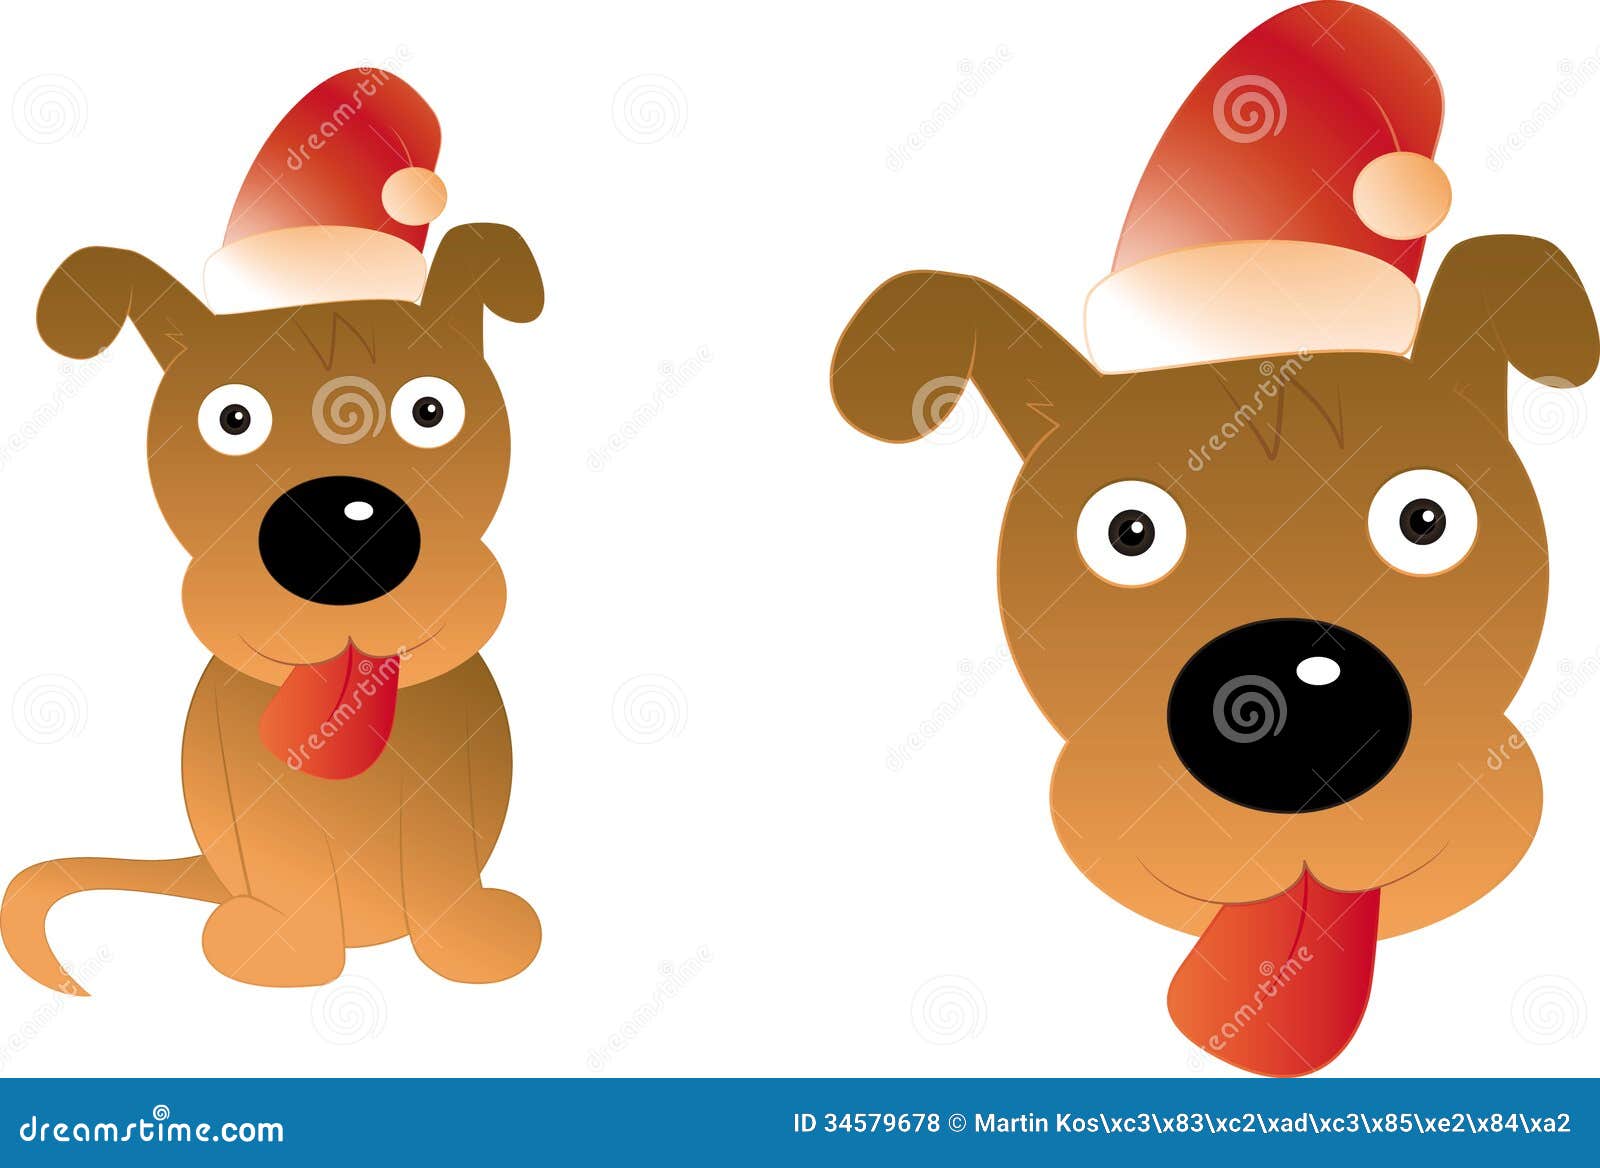 Funny Christmas Dog Cartoon Christmas Dogs Collection Vector Illustration Of Funny 25 Animated Christmas Movies That Are Too Cute To Resist Reihanhijab